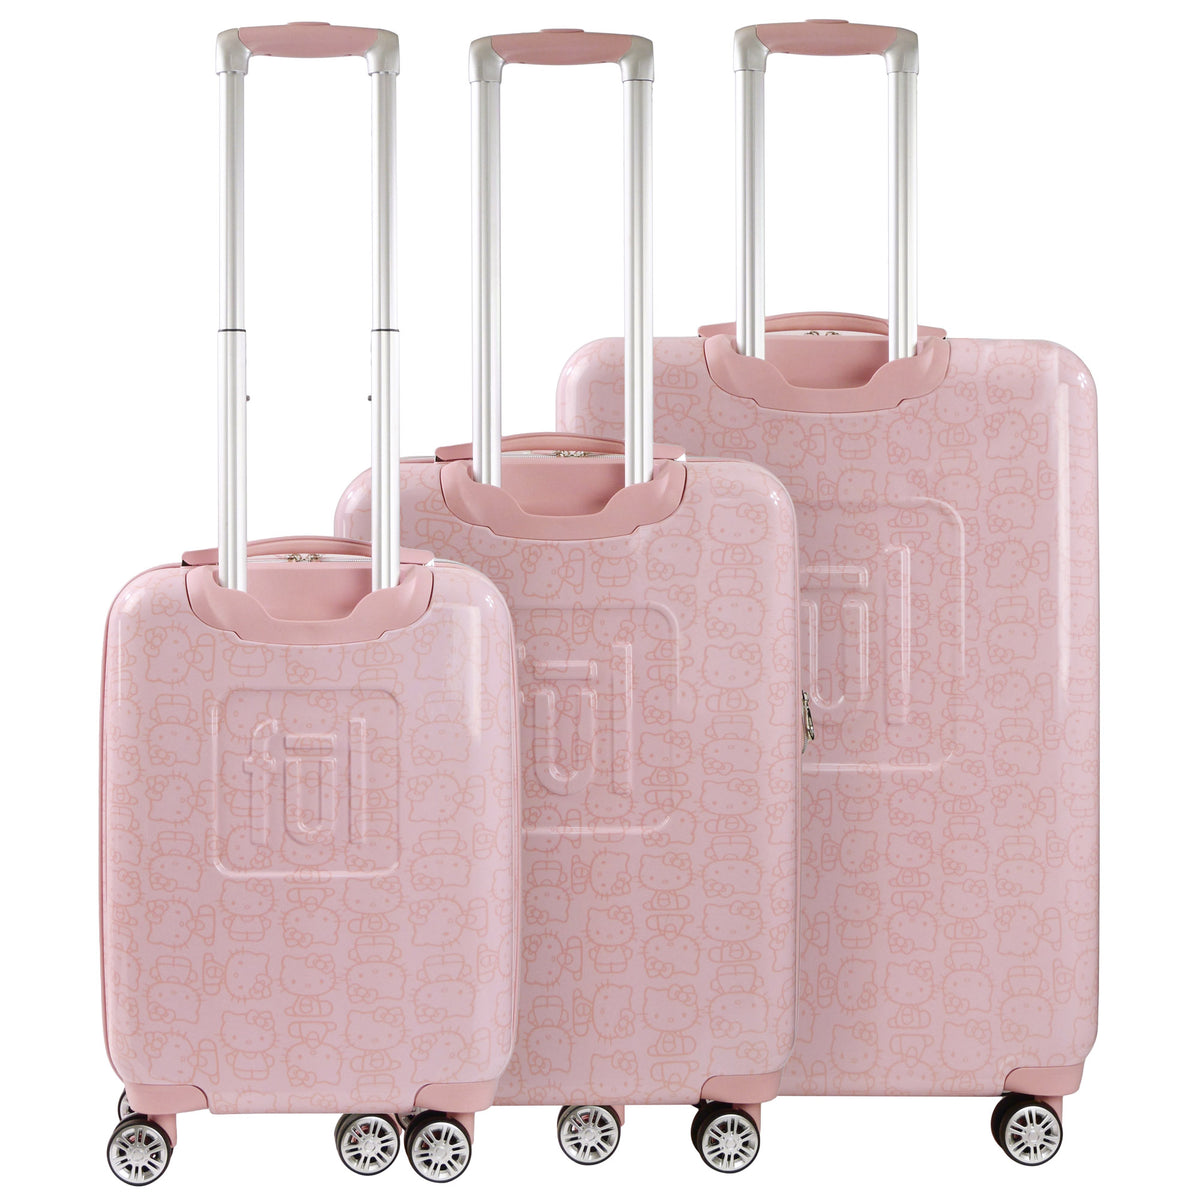 Hello Kitty x FUL 3-Piece Hardshell Luggage Set in Pink Travel Concept 1   